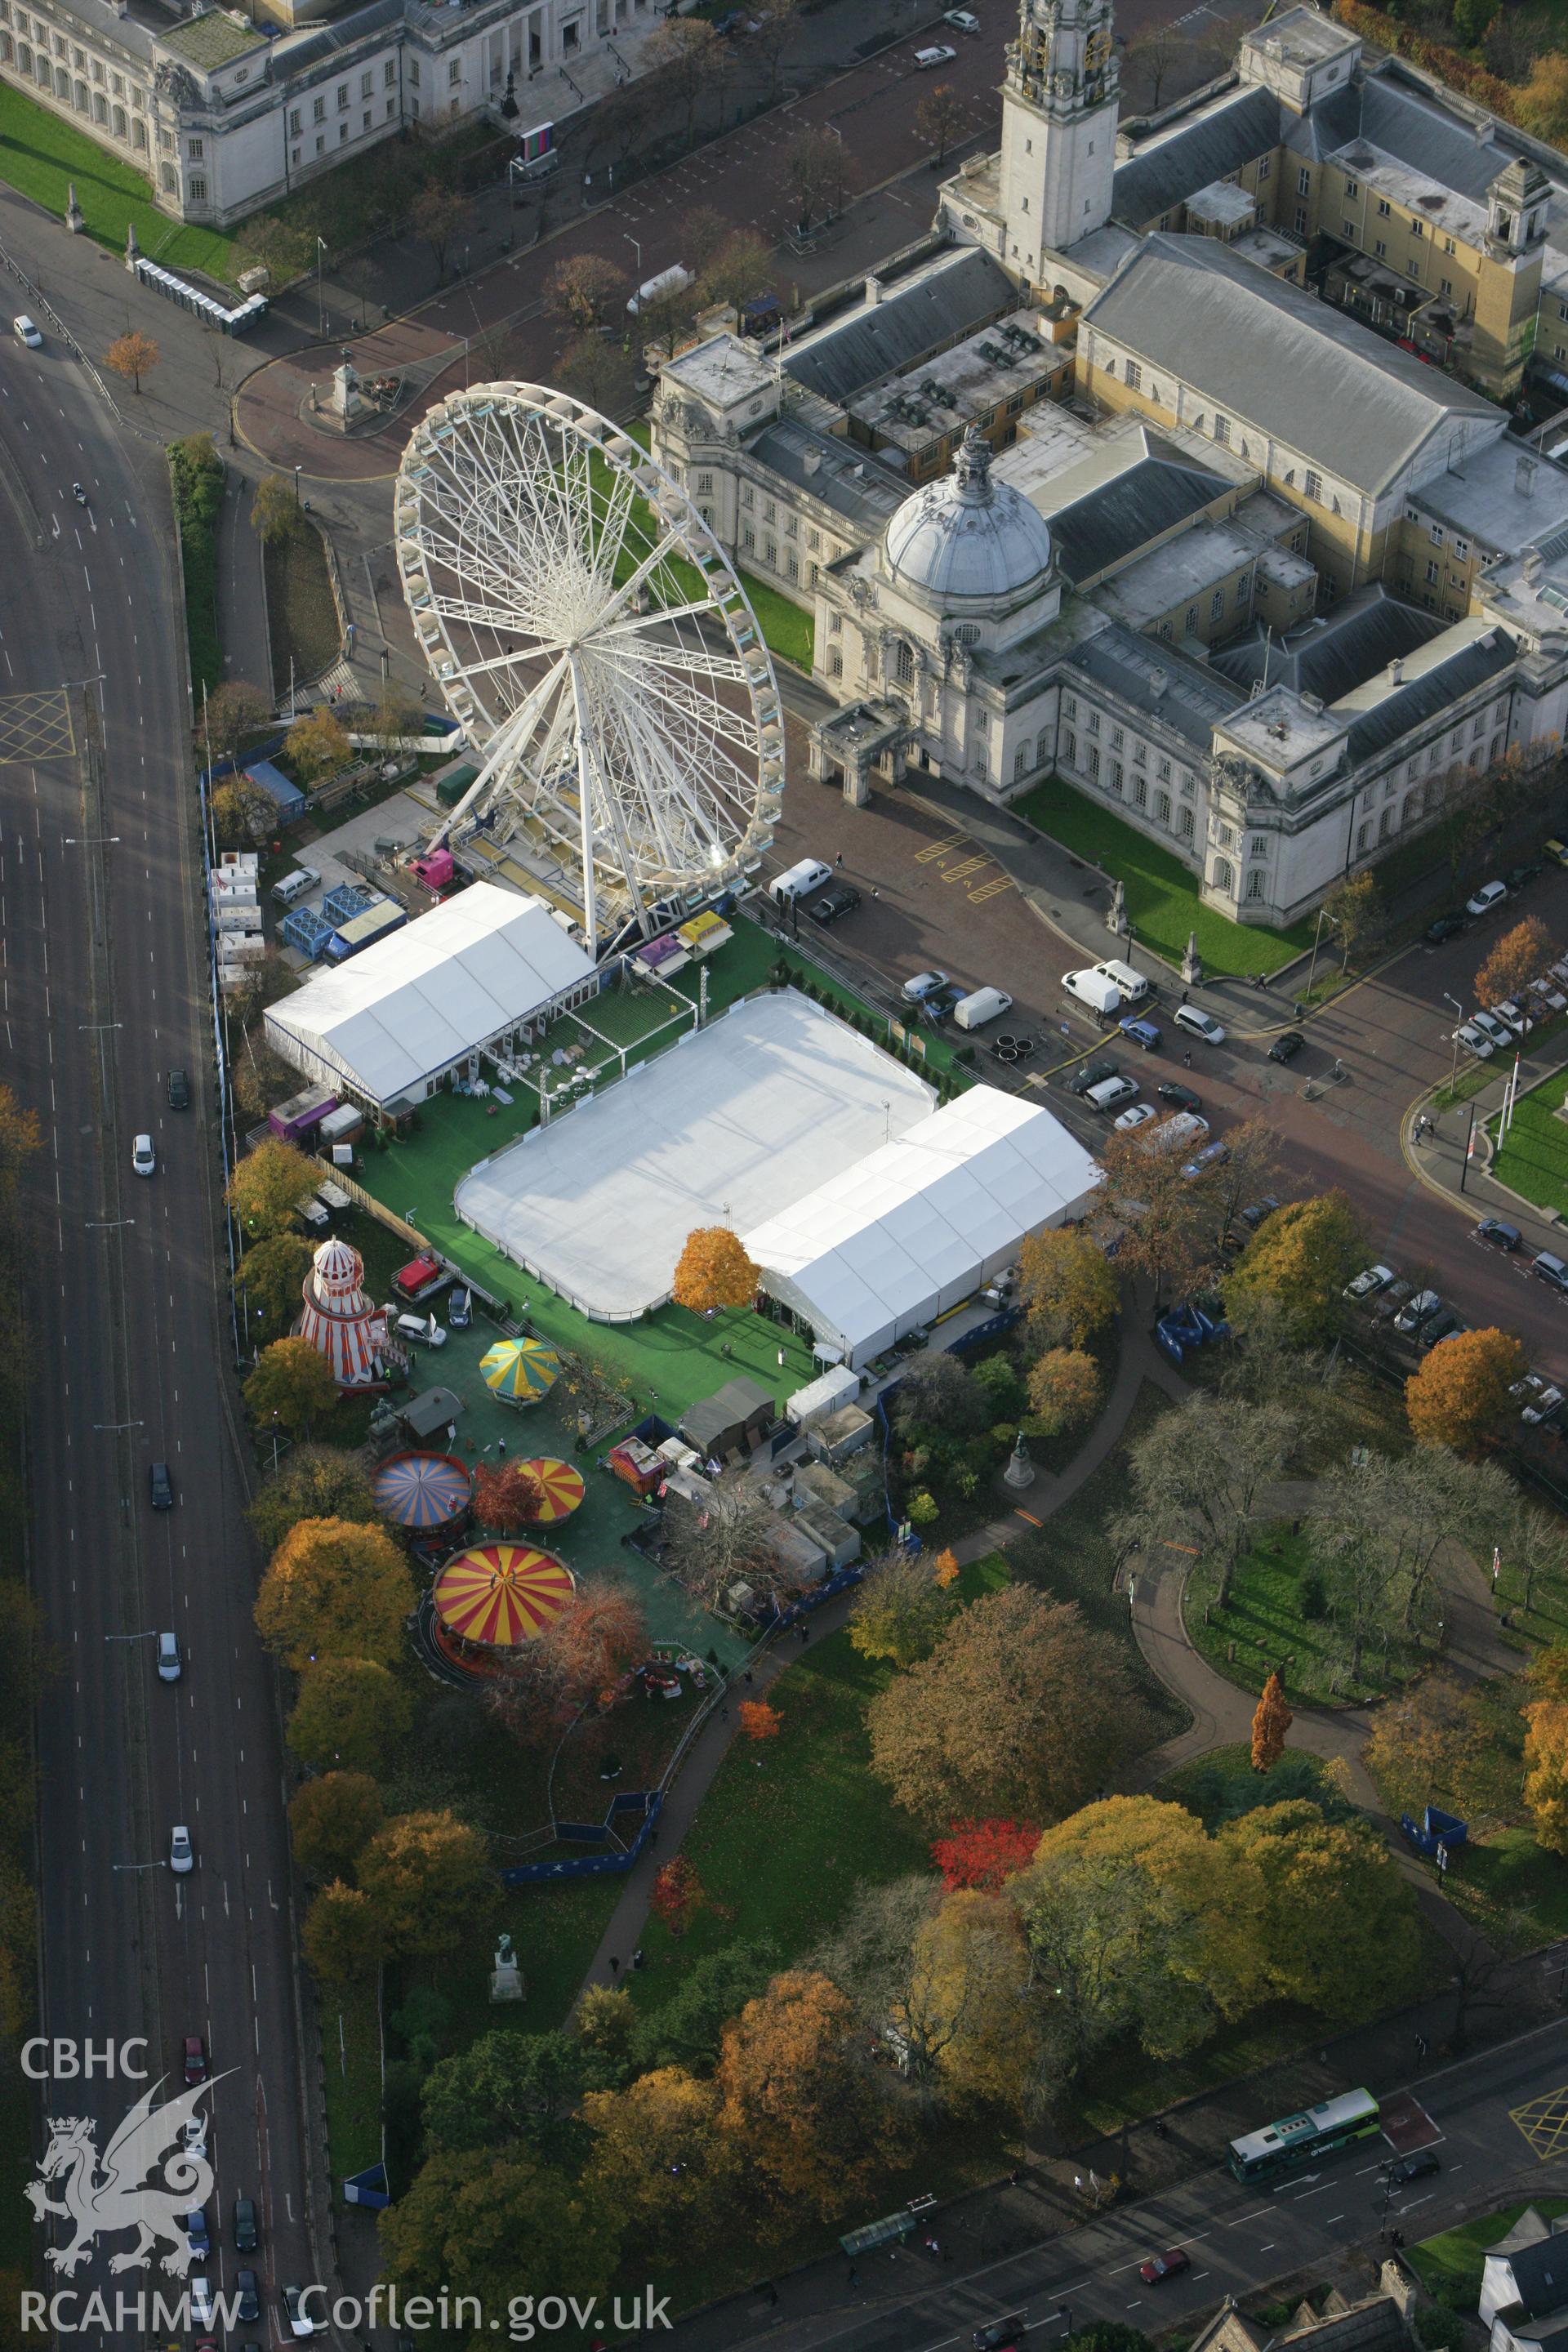 RCAHMW colour oblique photograph of Cardiff City Hall, with the Cardiff Winter Wonderland fair and temporary ice rink. Taken by Toby Driver on 12/11/2008.